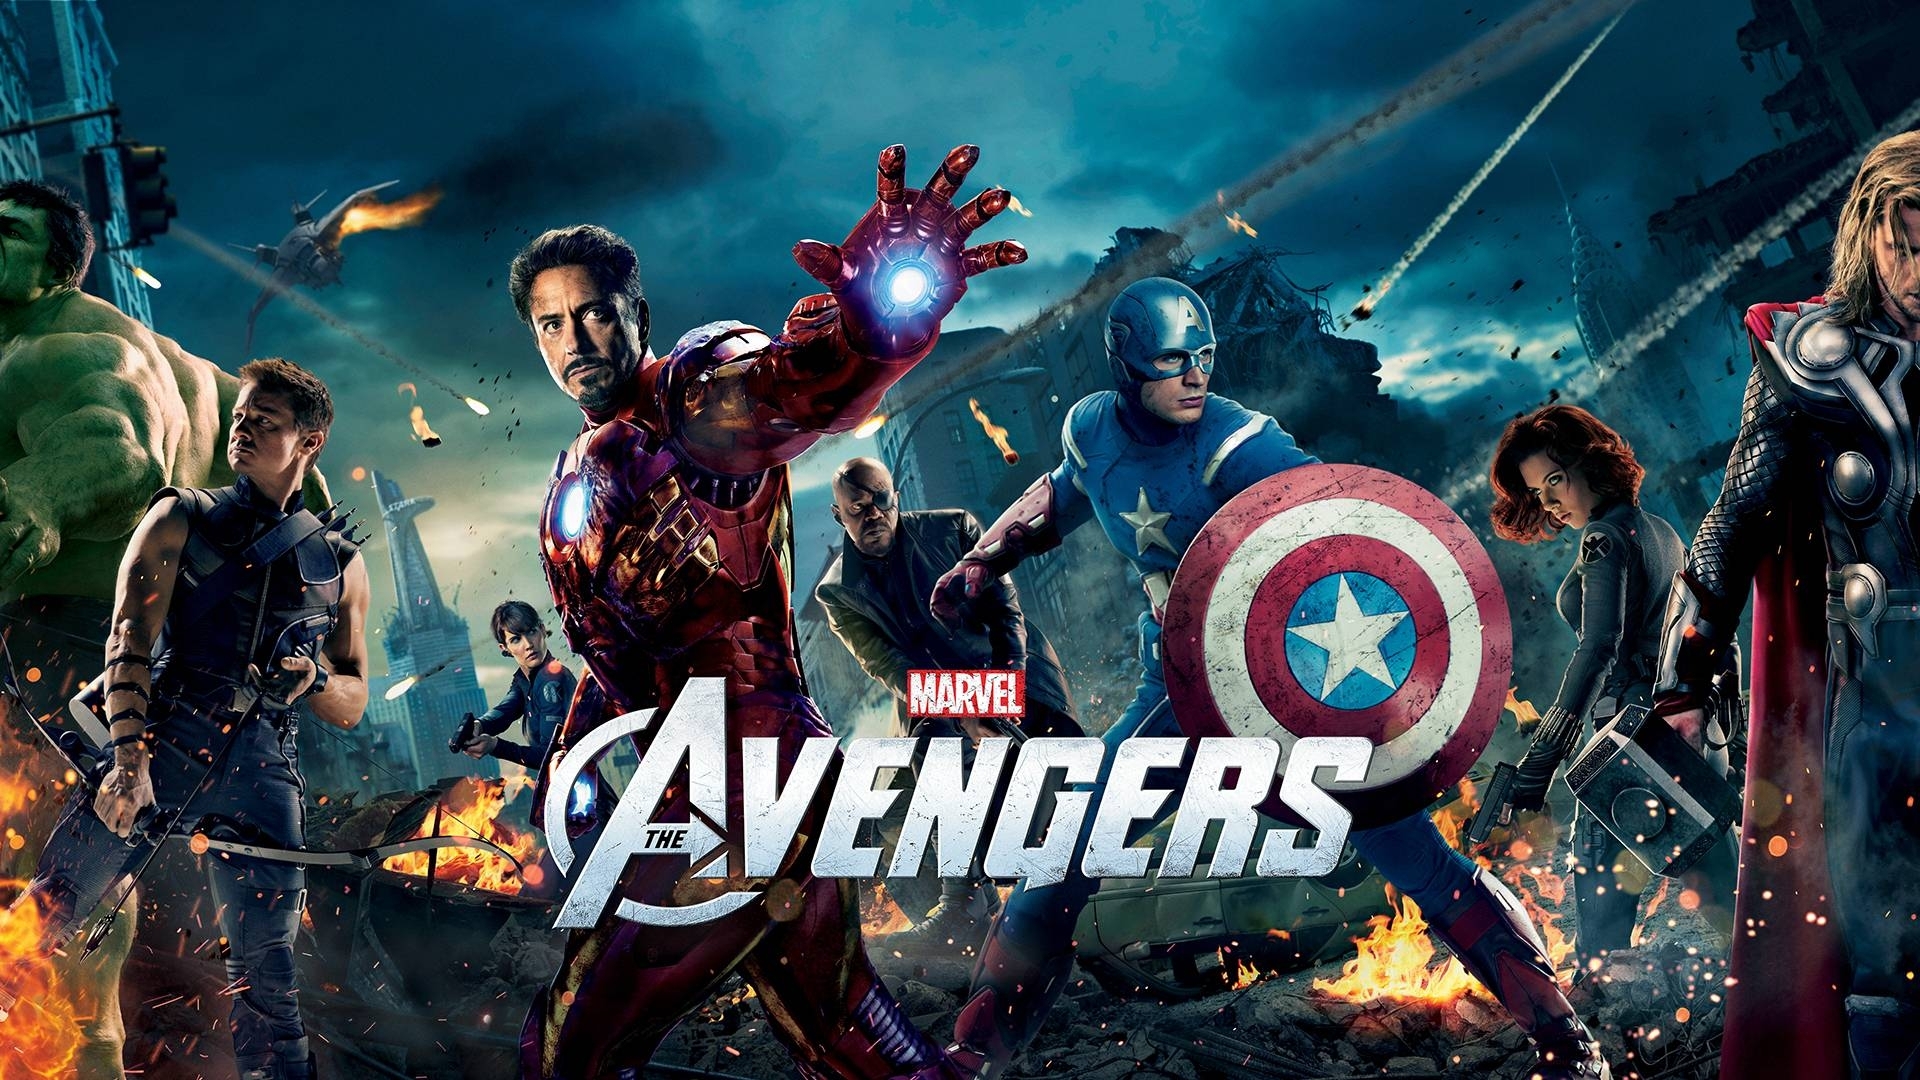 10 Most Popular The Avengers Hd Wallpaper FULL HD 1080p For PC Background